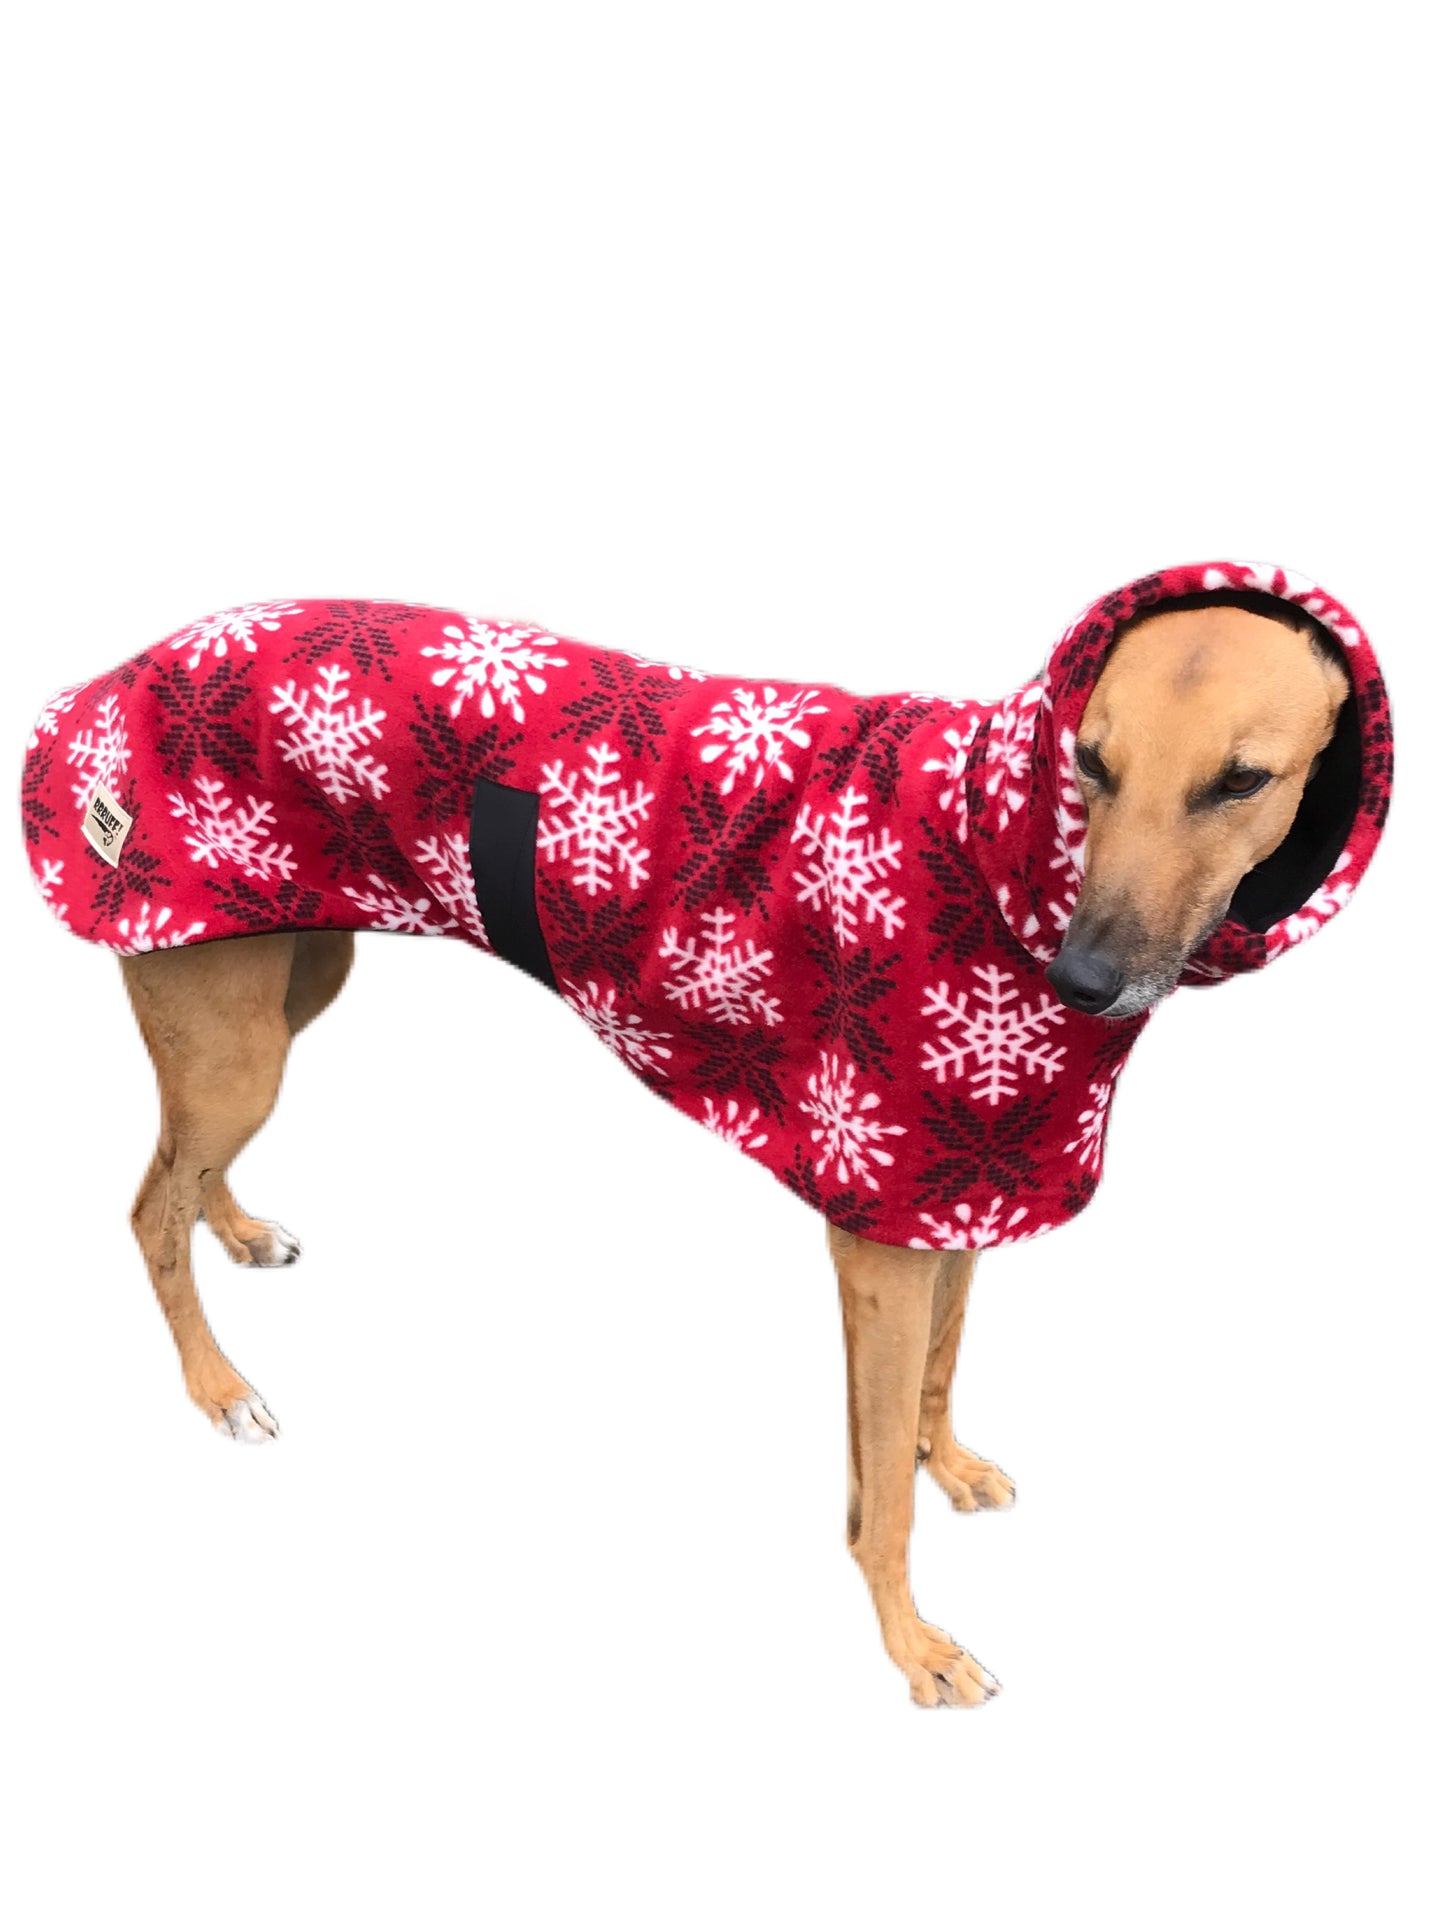 Snowflake red Deluxe greyhound coat rug thick polar fleece washable extra wide neck hoodie